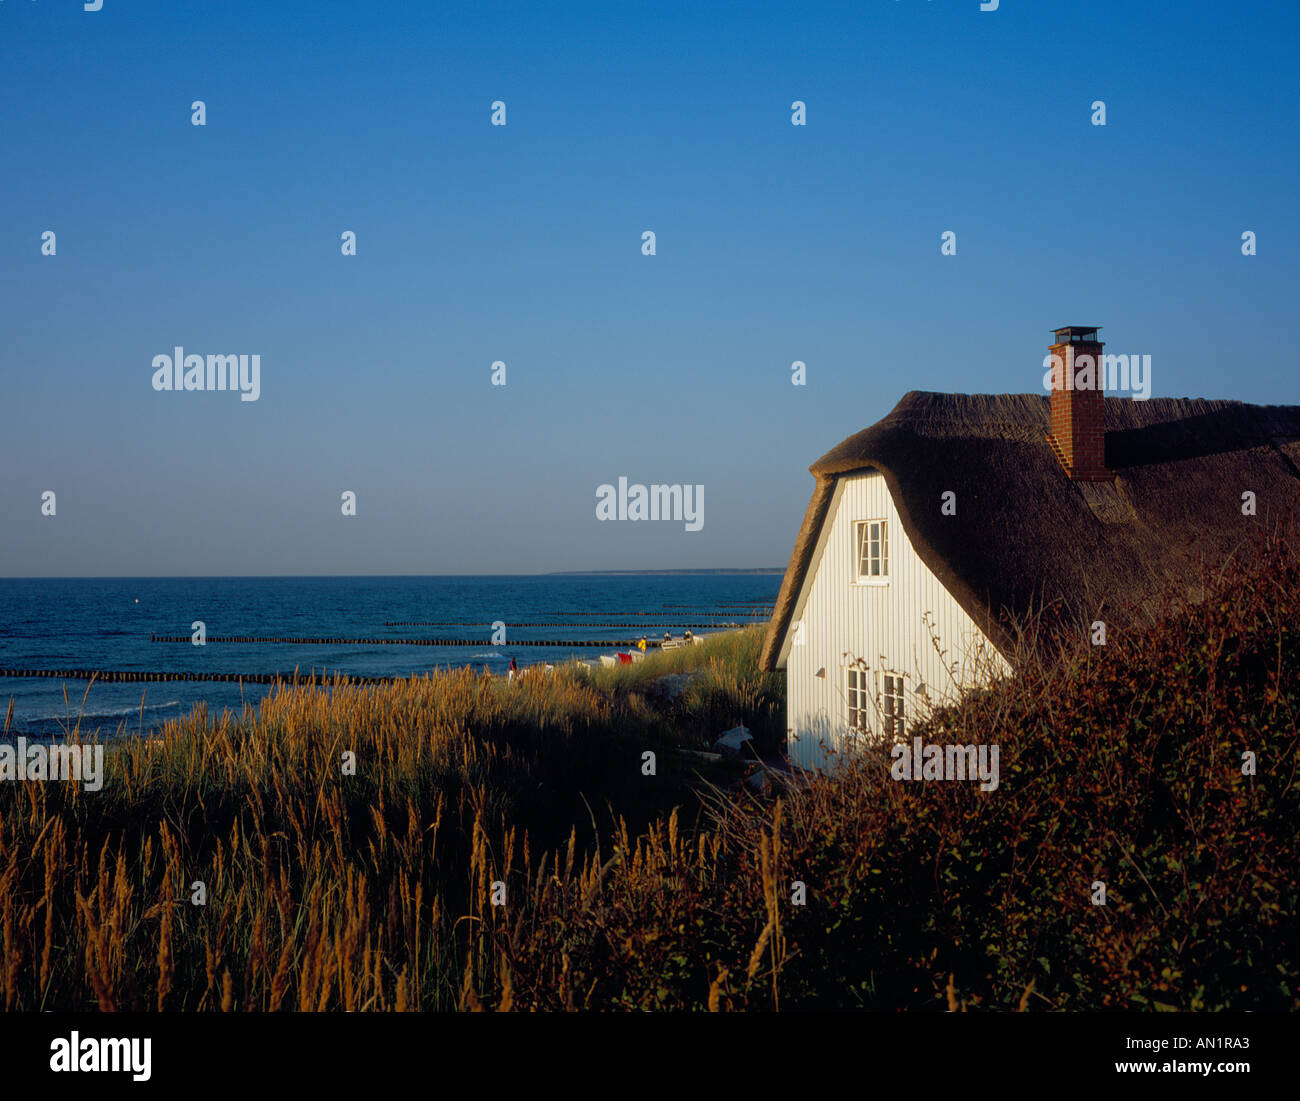 house by the sea Ahrenshoop Darss Mecklenburg Vorpommern Baltic Sea Germany Europe. Photo by Willy Matheisl Stock Photo